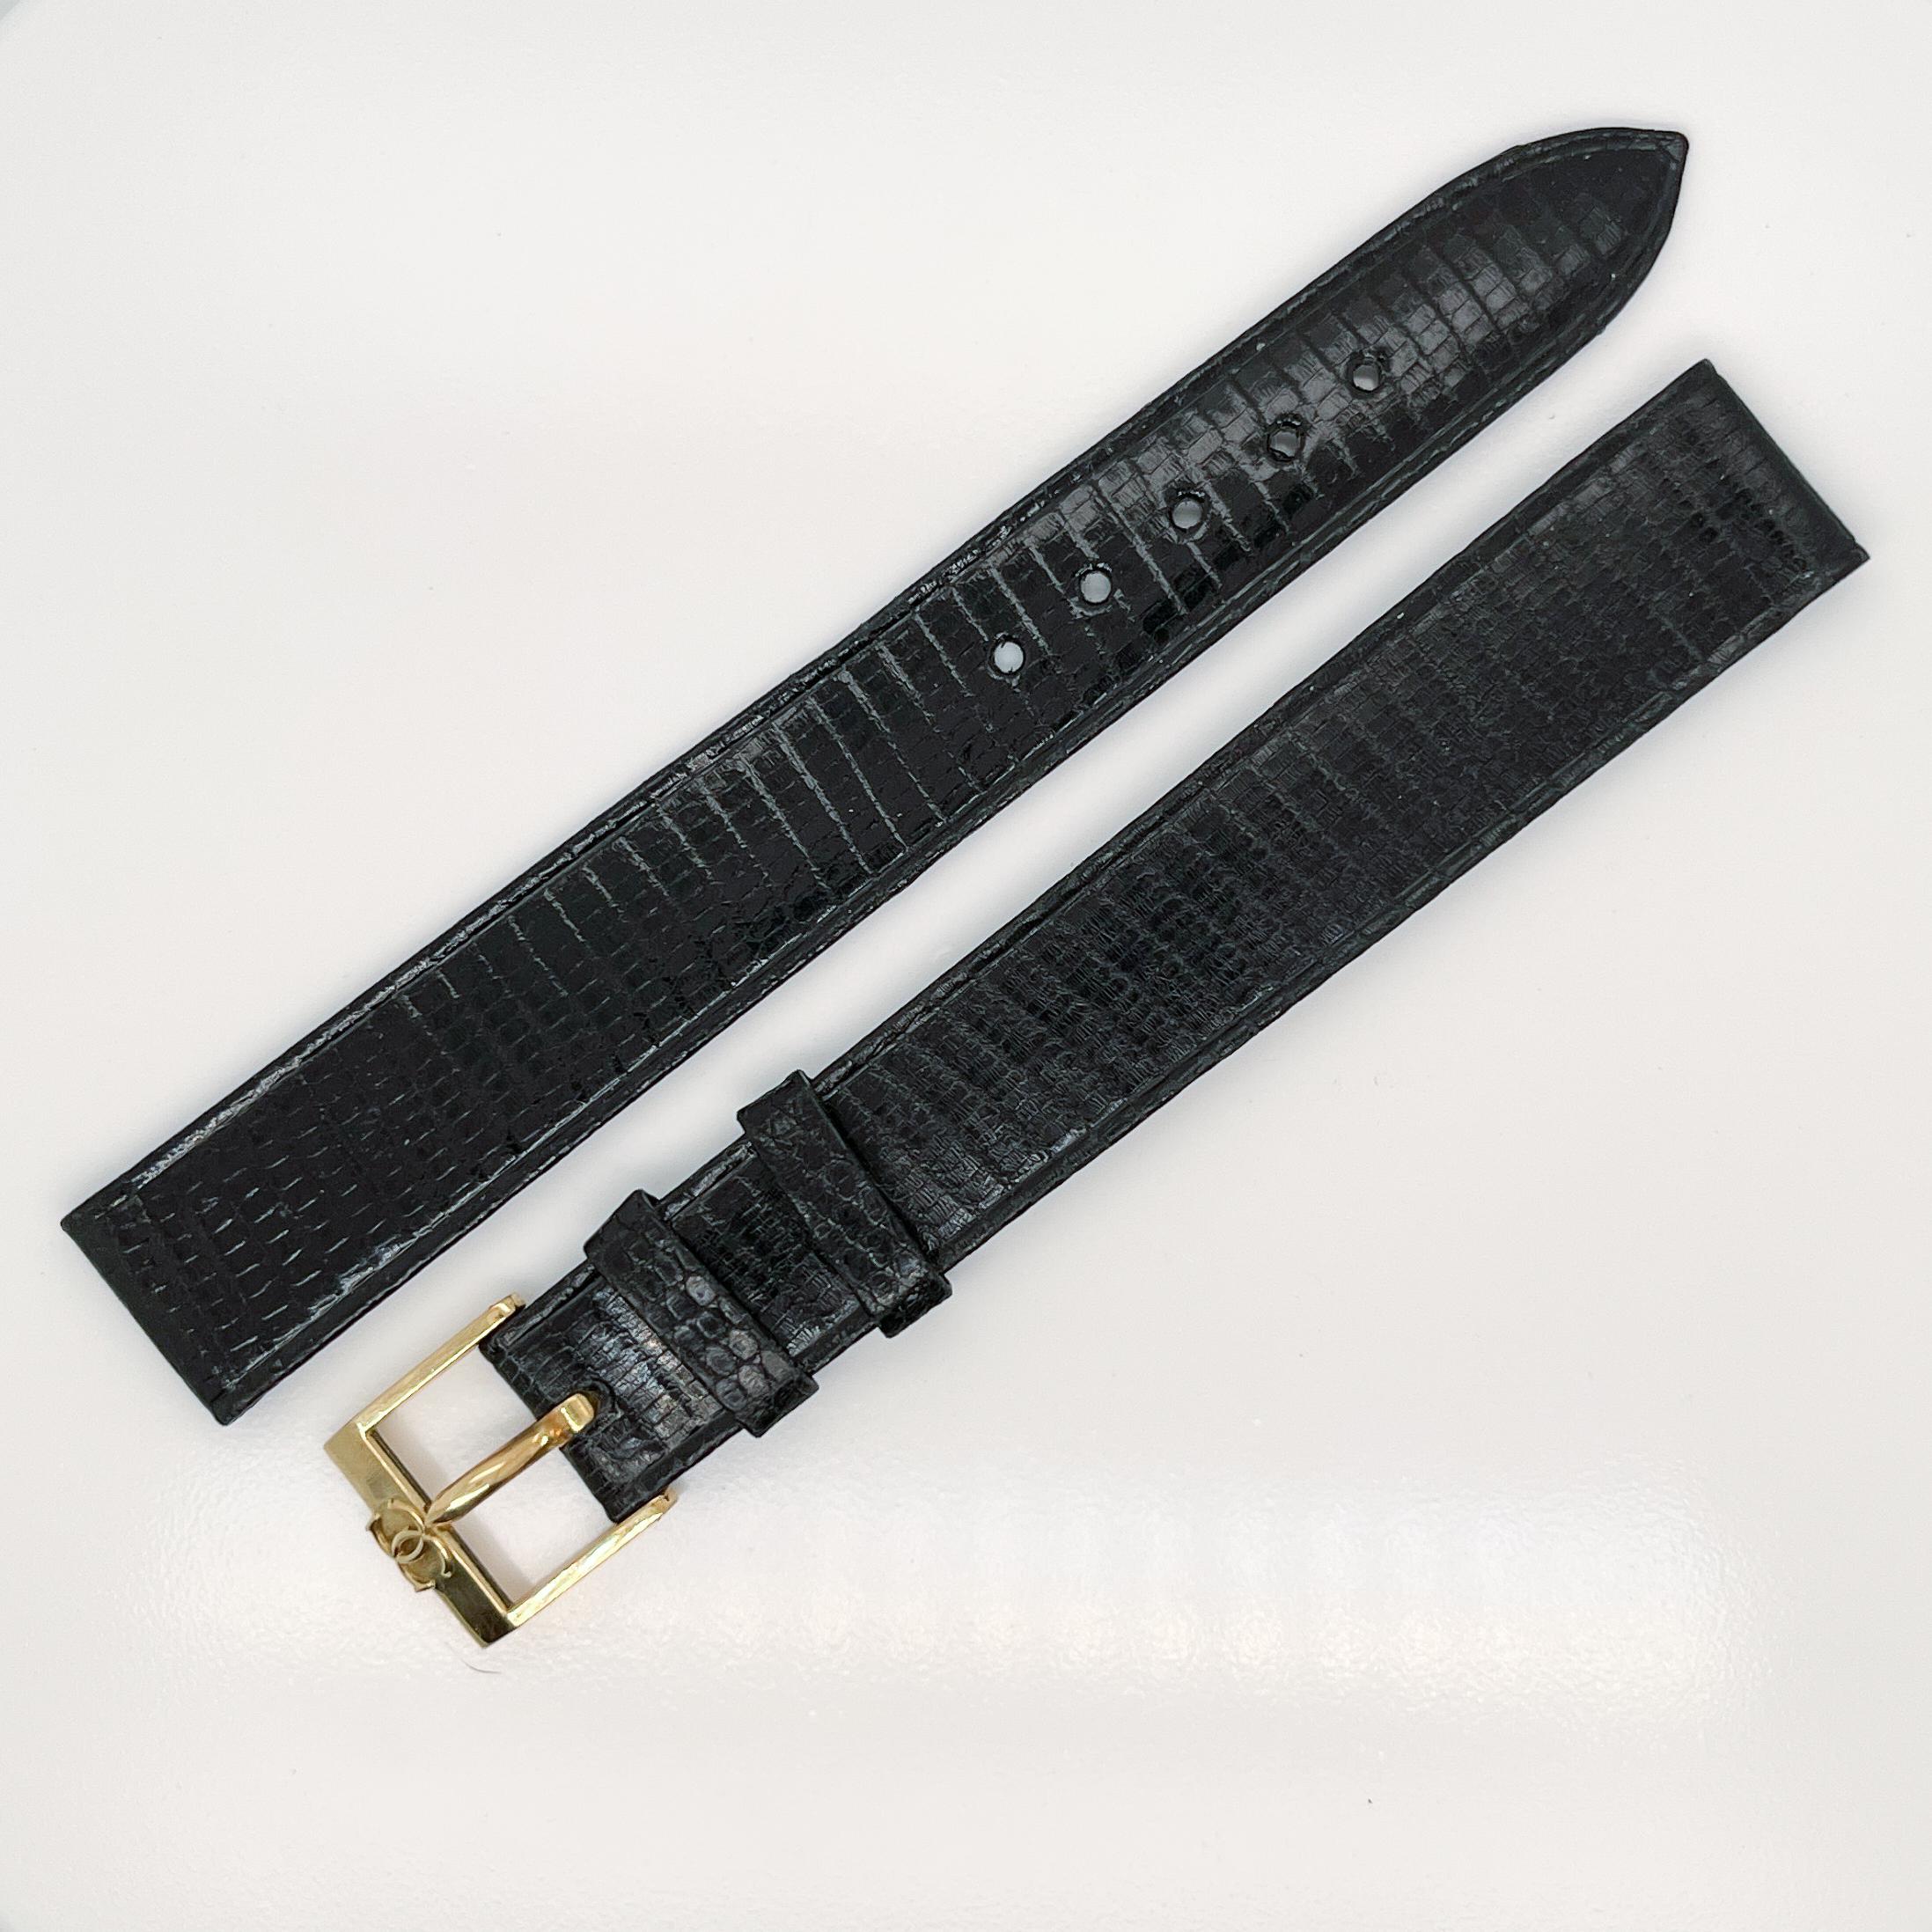 A very fine vintage unused Cartier 18 karat gold and leather wrist watch band.

With a dark brown leather alligator skin pattern. 

The buckle has the mirrored C Cartier signature logo.

Simply a great watch band!

Date:
20th Century

Overall